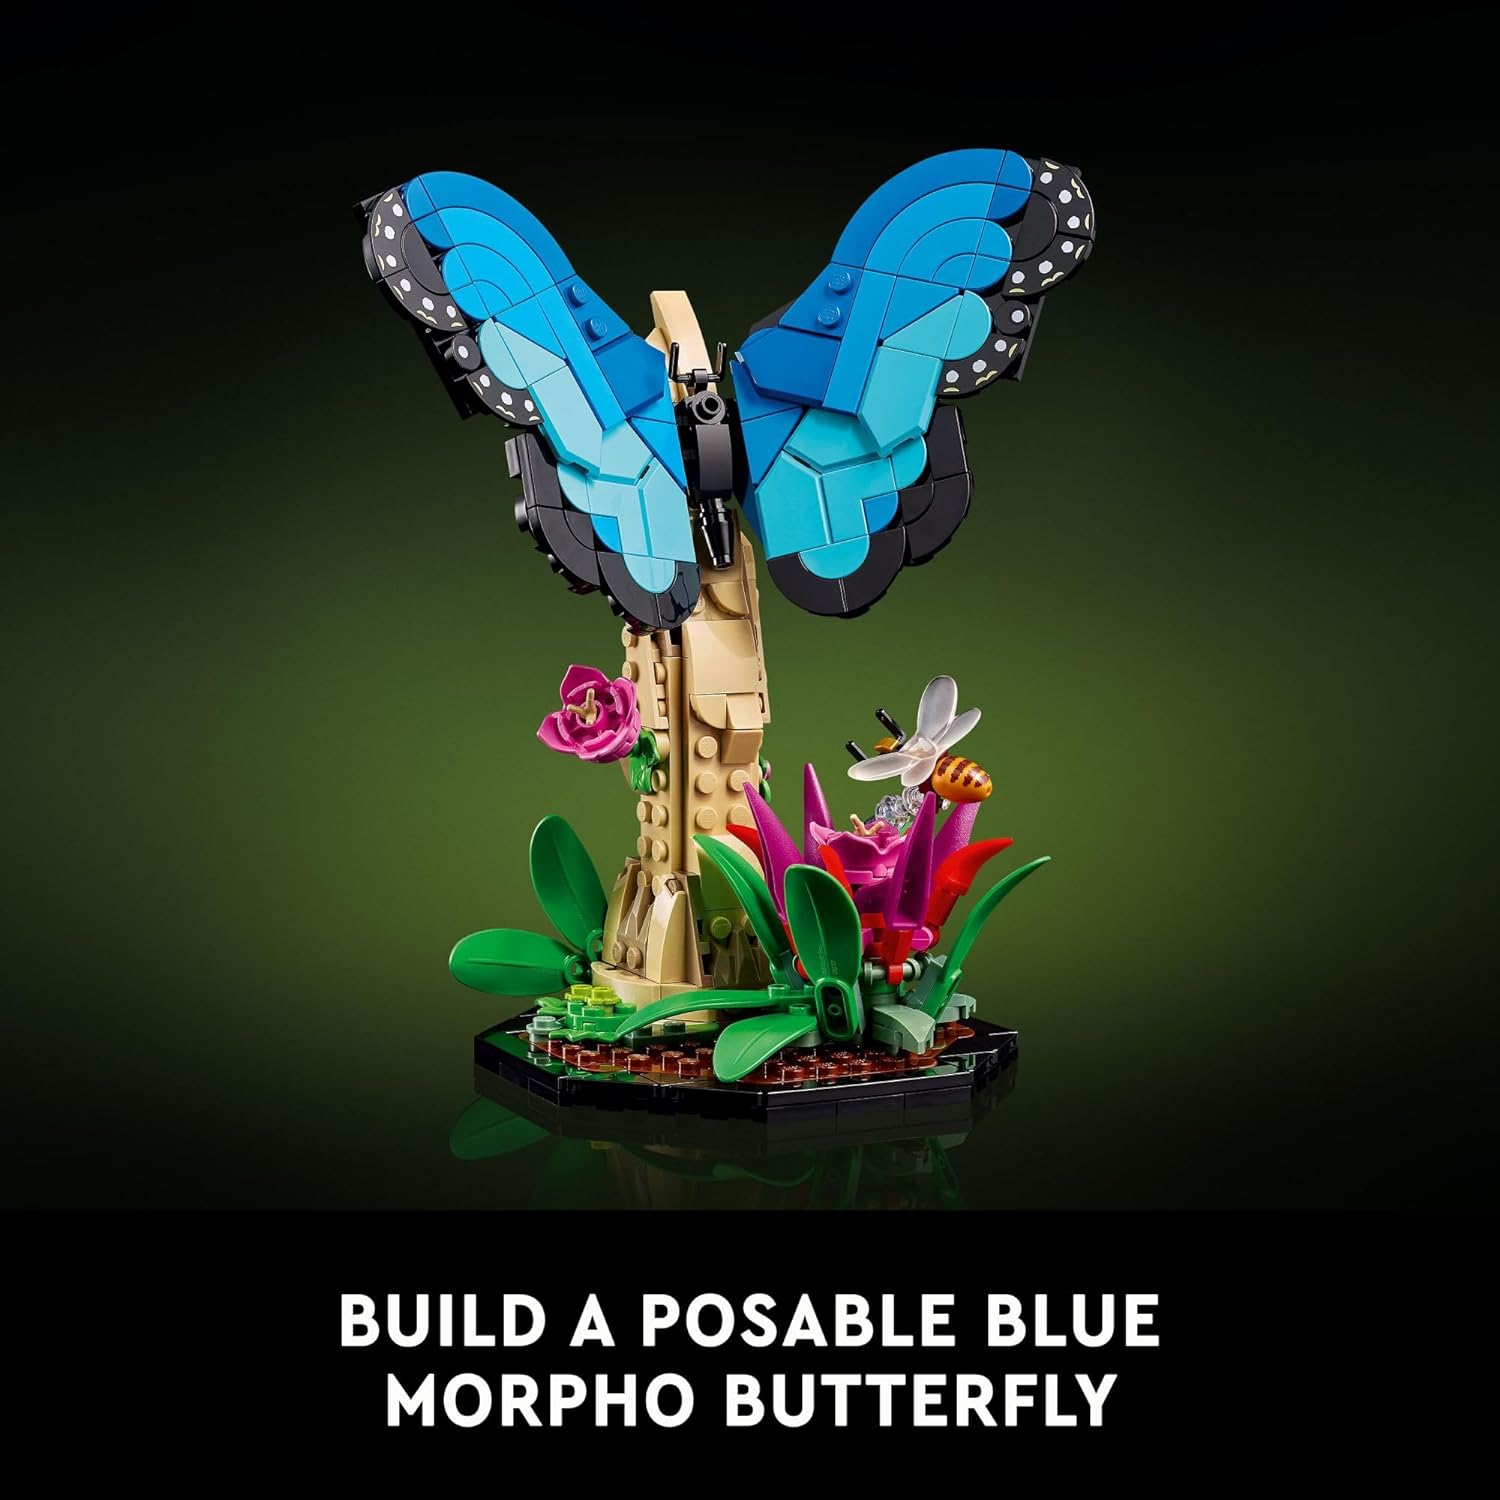 LEGO 21342 Ideas The Insect Collection, Fun Gift for Nature Lovers, with Life-Size Blue Morpho Butterfly, Hercules Beetle and Chinese Mantis Display Models, Bug Building Set and Nature Décor